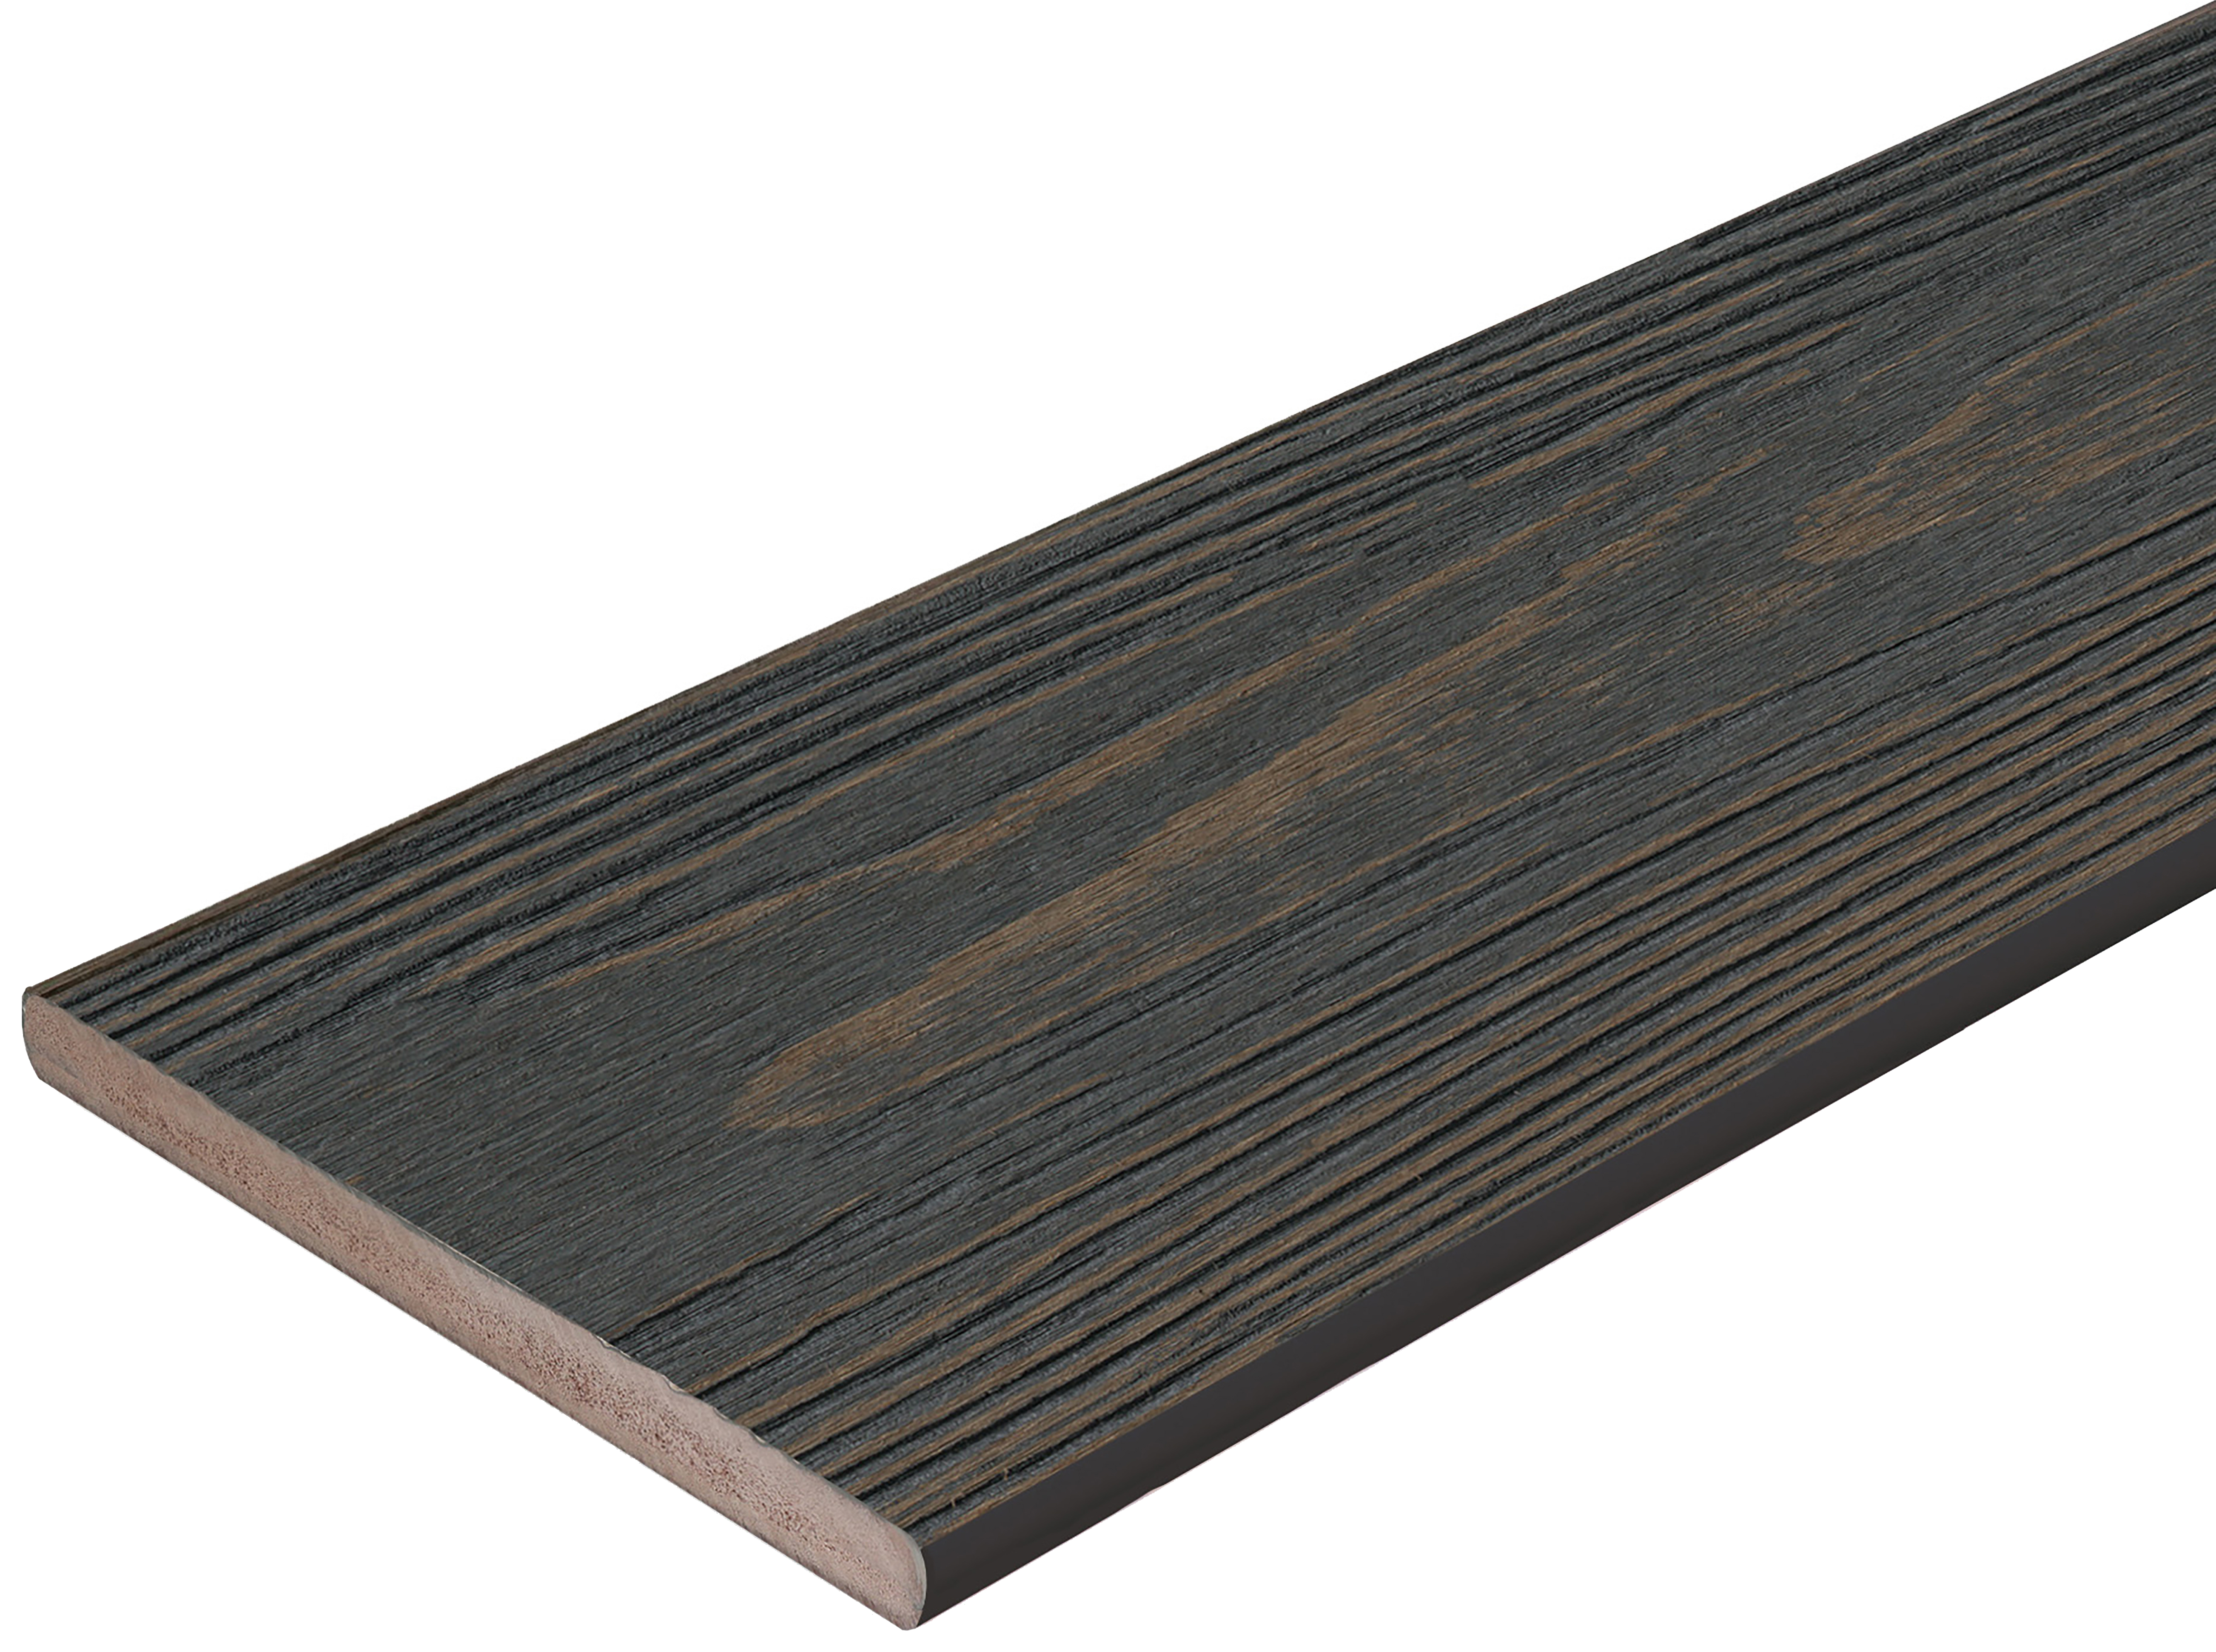 Image of Apex Carbonised Cedar Fasia - 12 x 150mm x 2200mm - Pack of 5